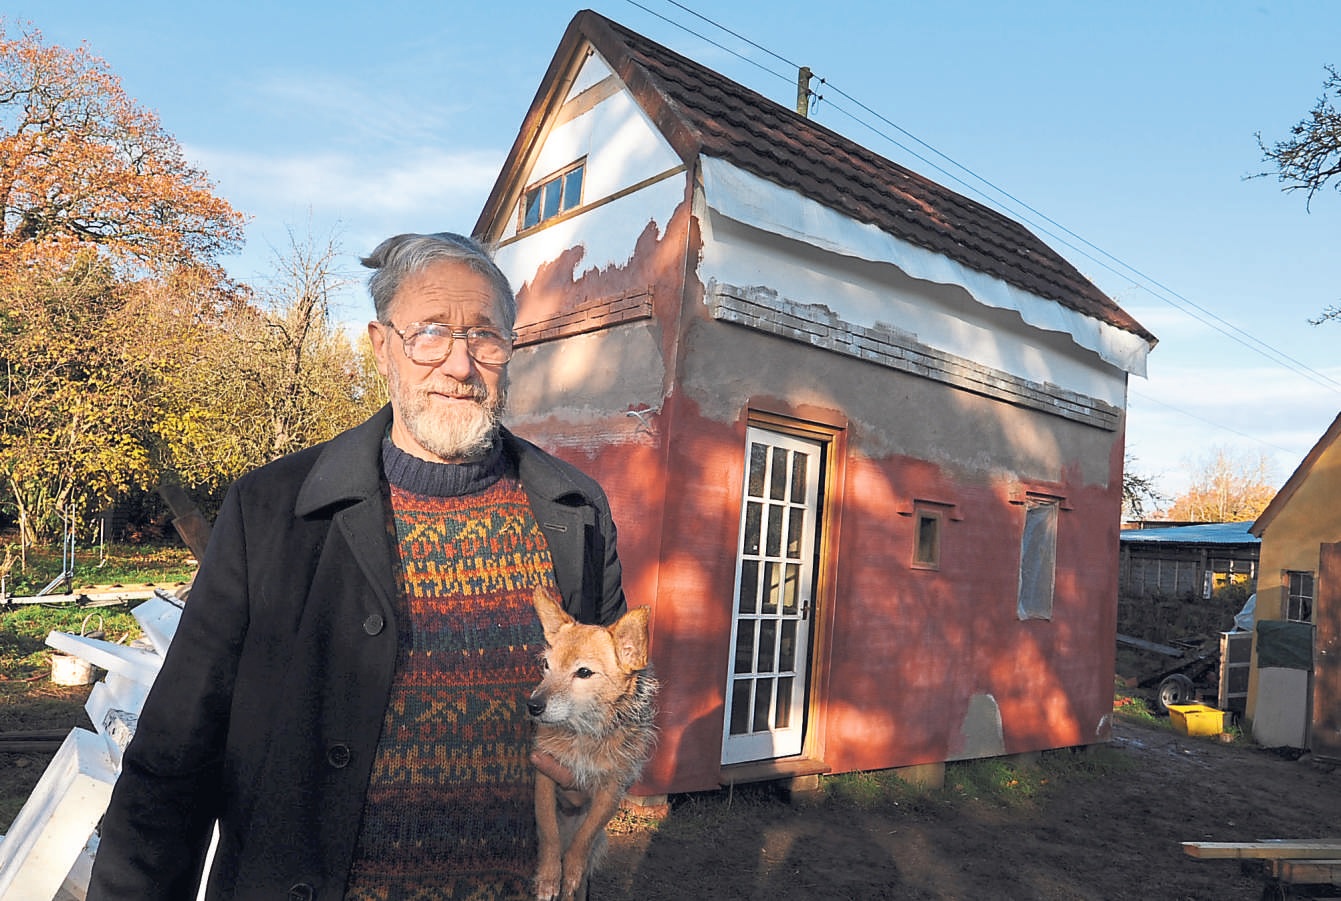 North Herefordshire man's 'plastic house' offers new solution to housing crisis